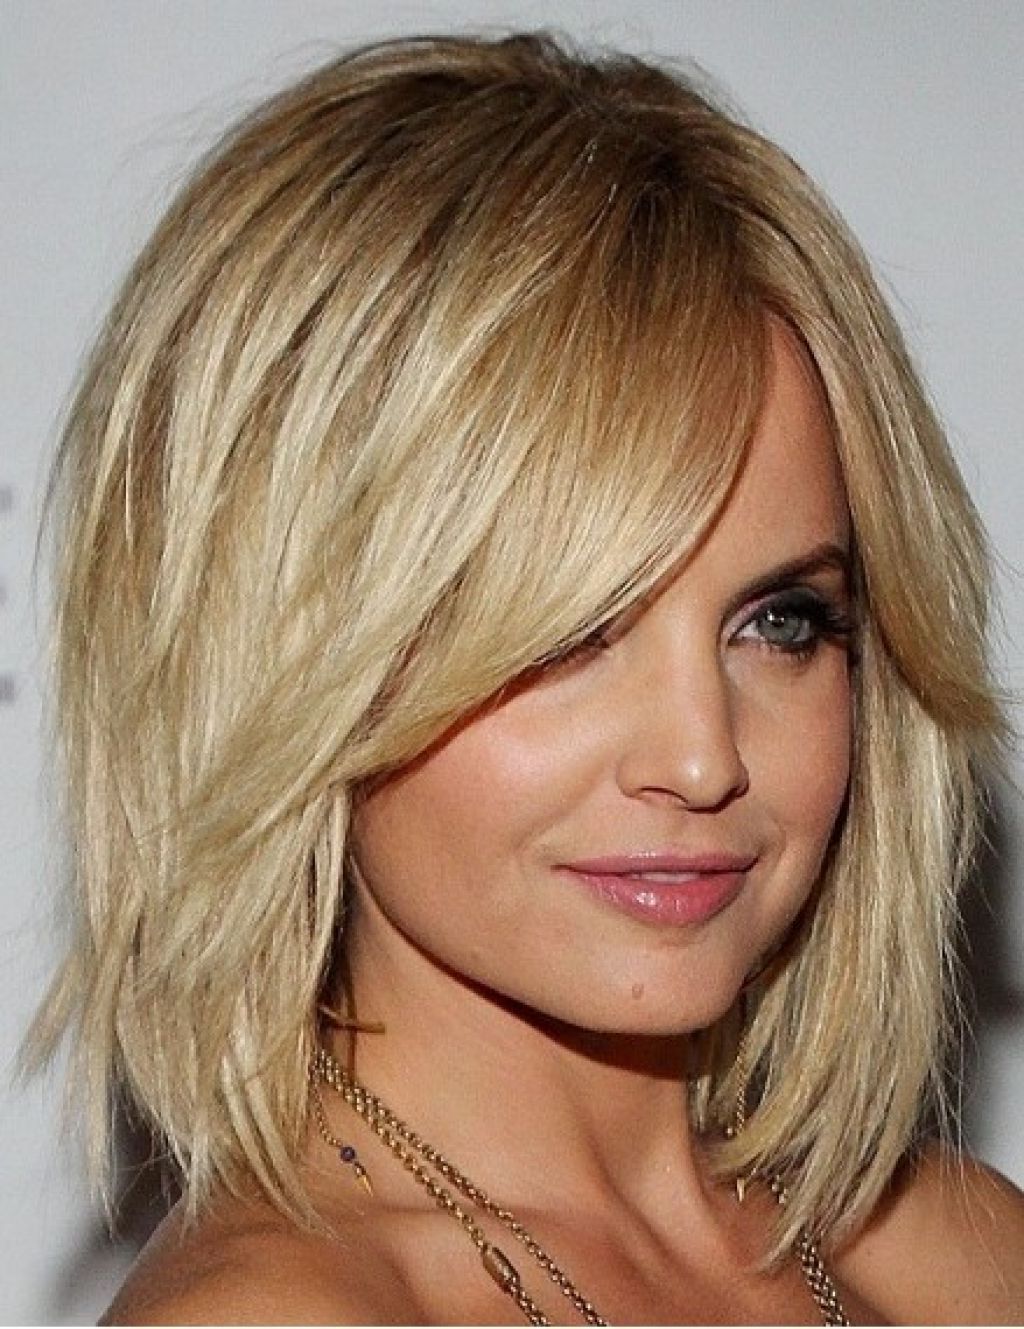 Widely Used Medium Hairstyles With Bangs For Oval Faces Throughout Choppy Bob Style For Mid Length Hair On Women (View 20 of 20)